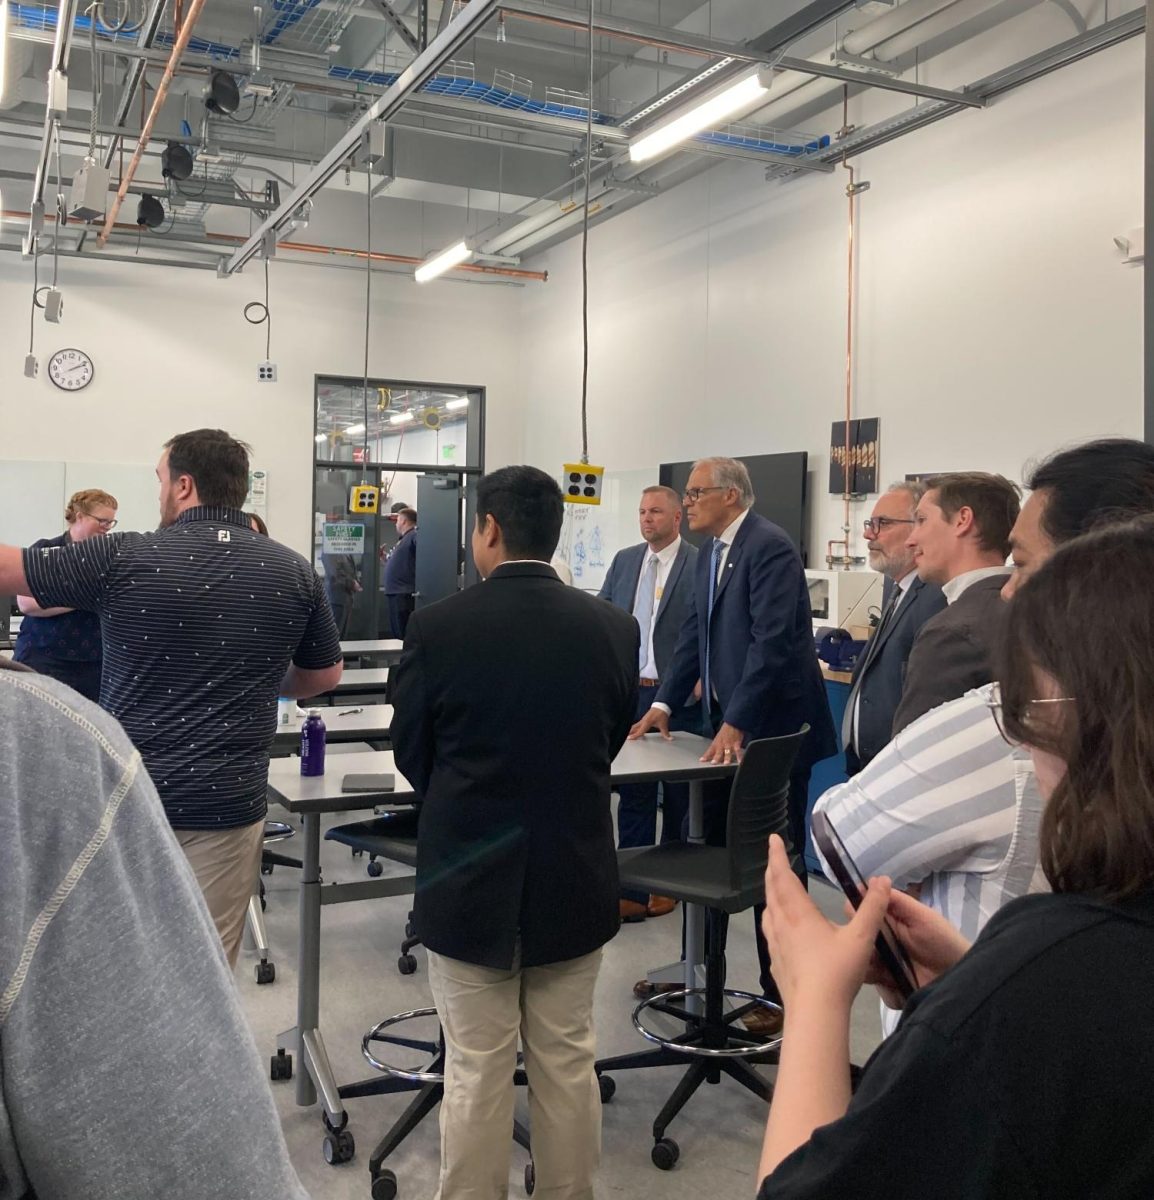 Jay Inslee, his and SCC staffs, visiting the Cedar Building.